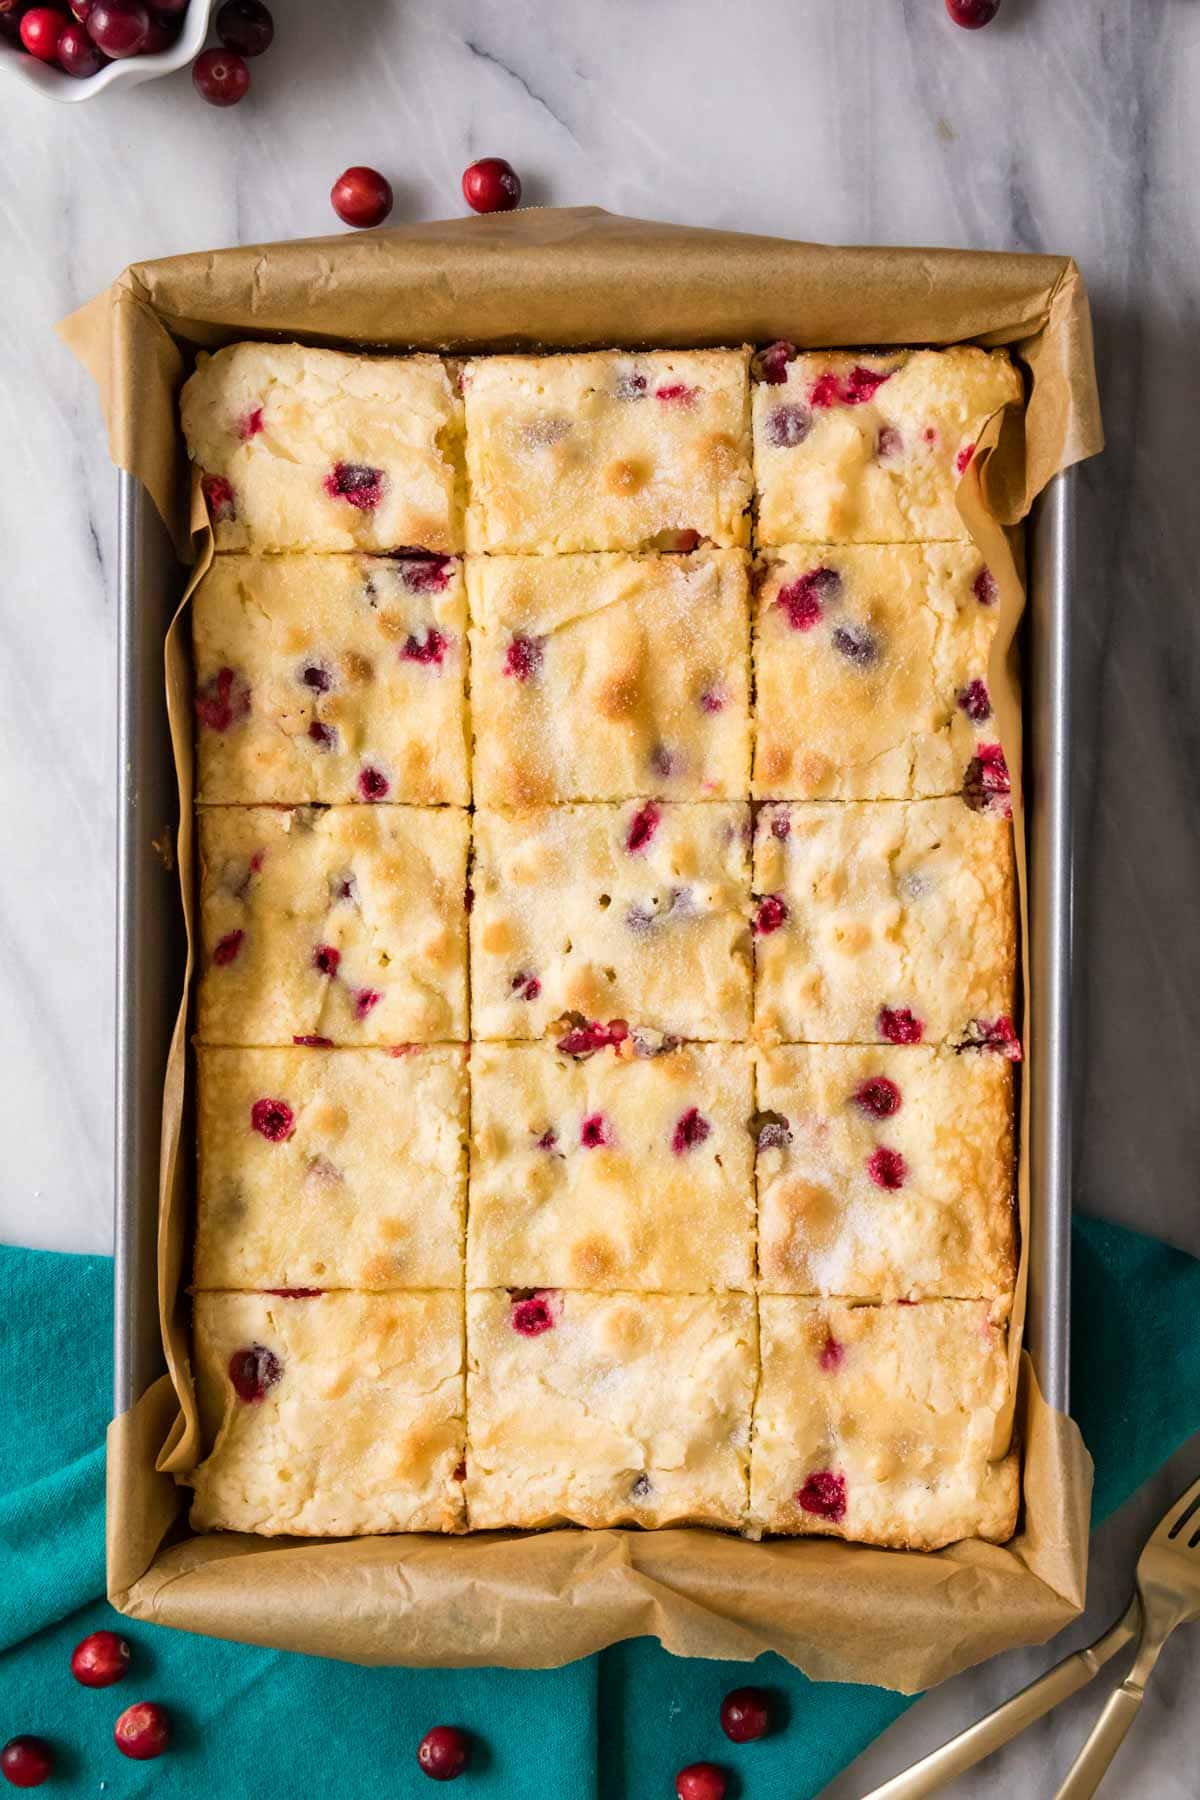 Overhead view of a cake made with fresh cranberries cut into squares while still in its pan.